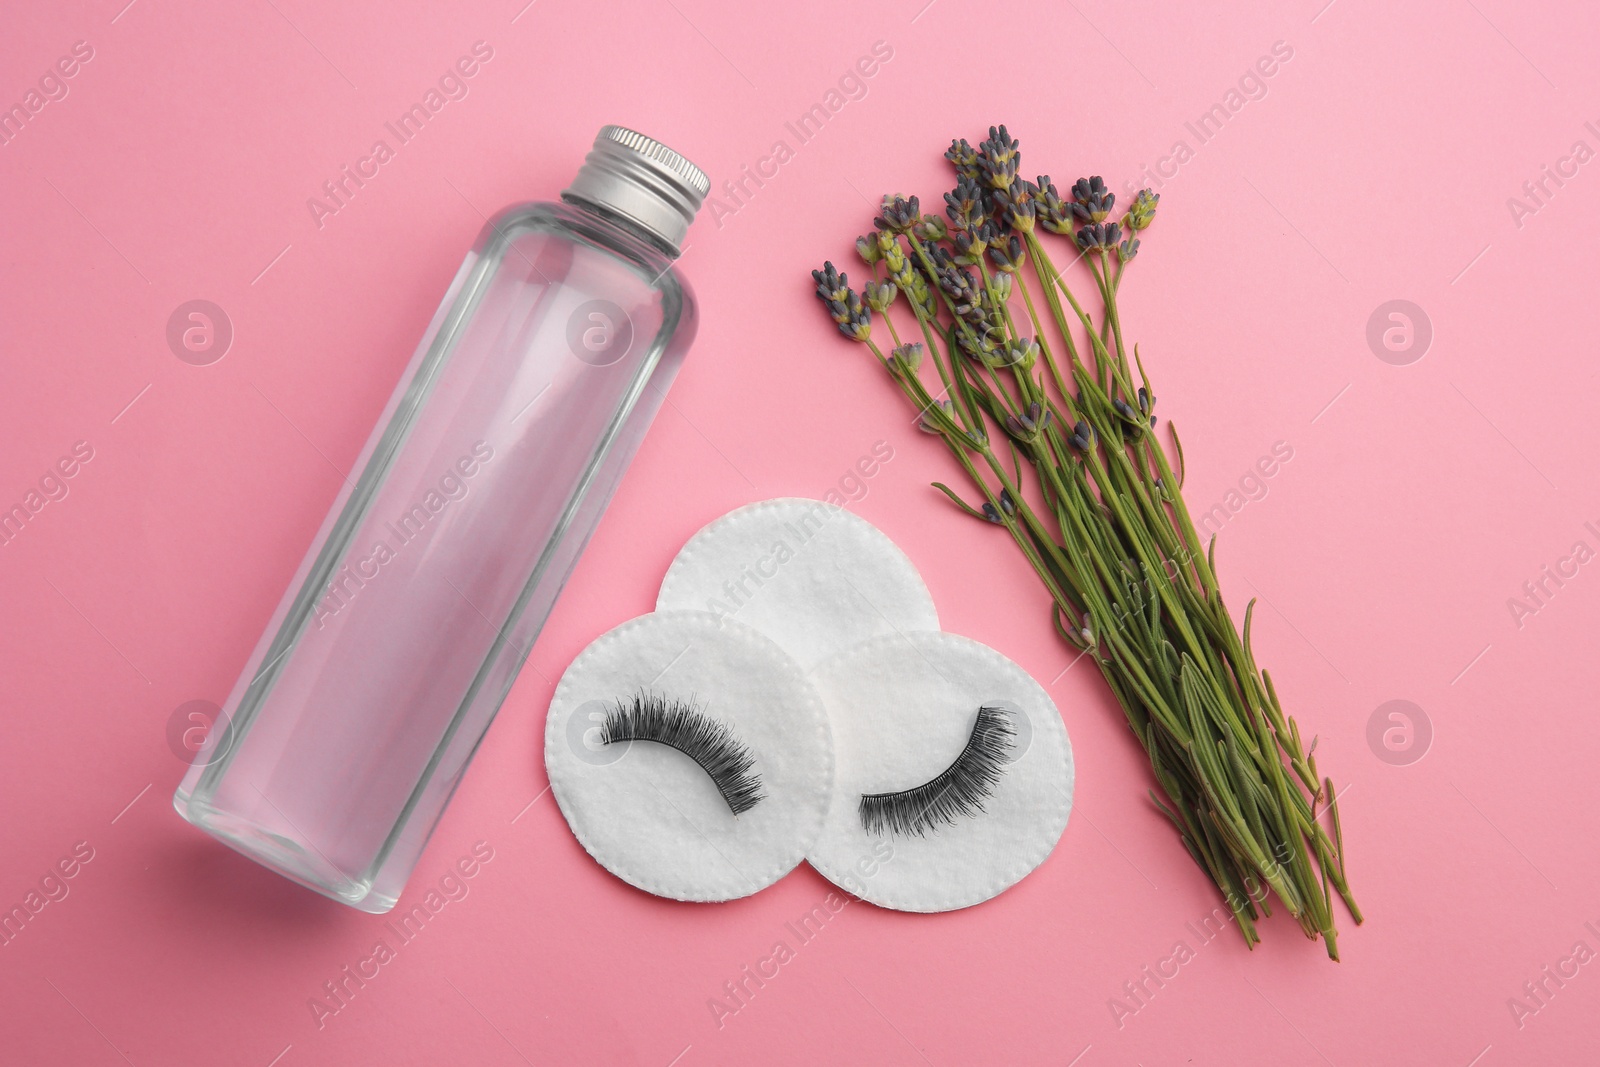 Photo of Bottle of makeup remover, cotton pads, false eyelashes and lavender on pink background, flat lay